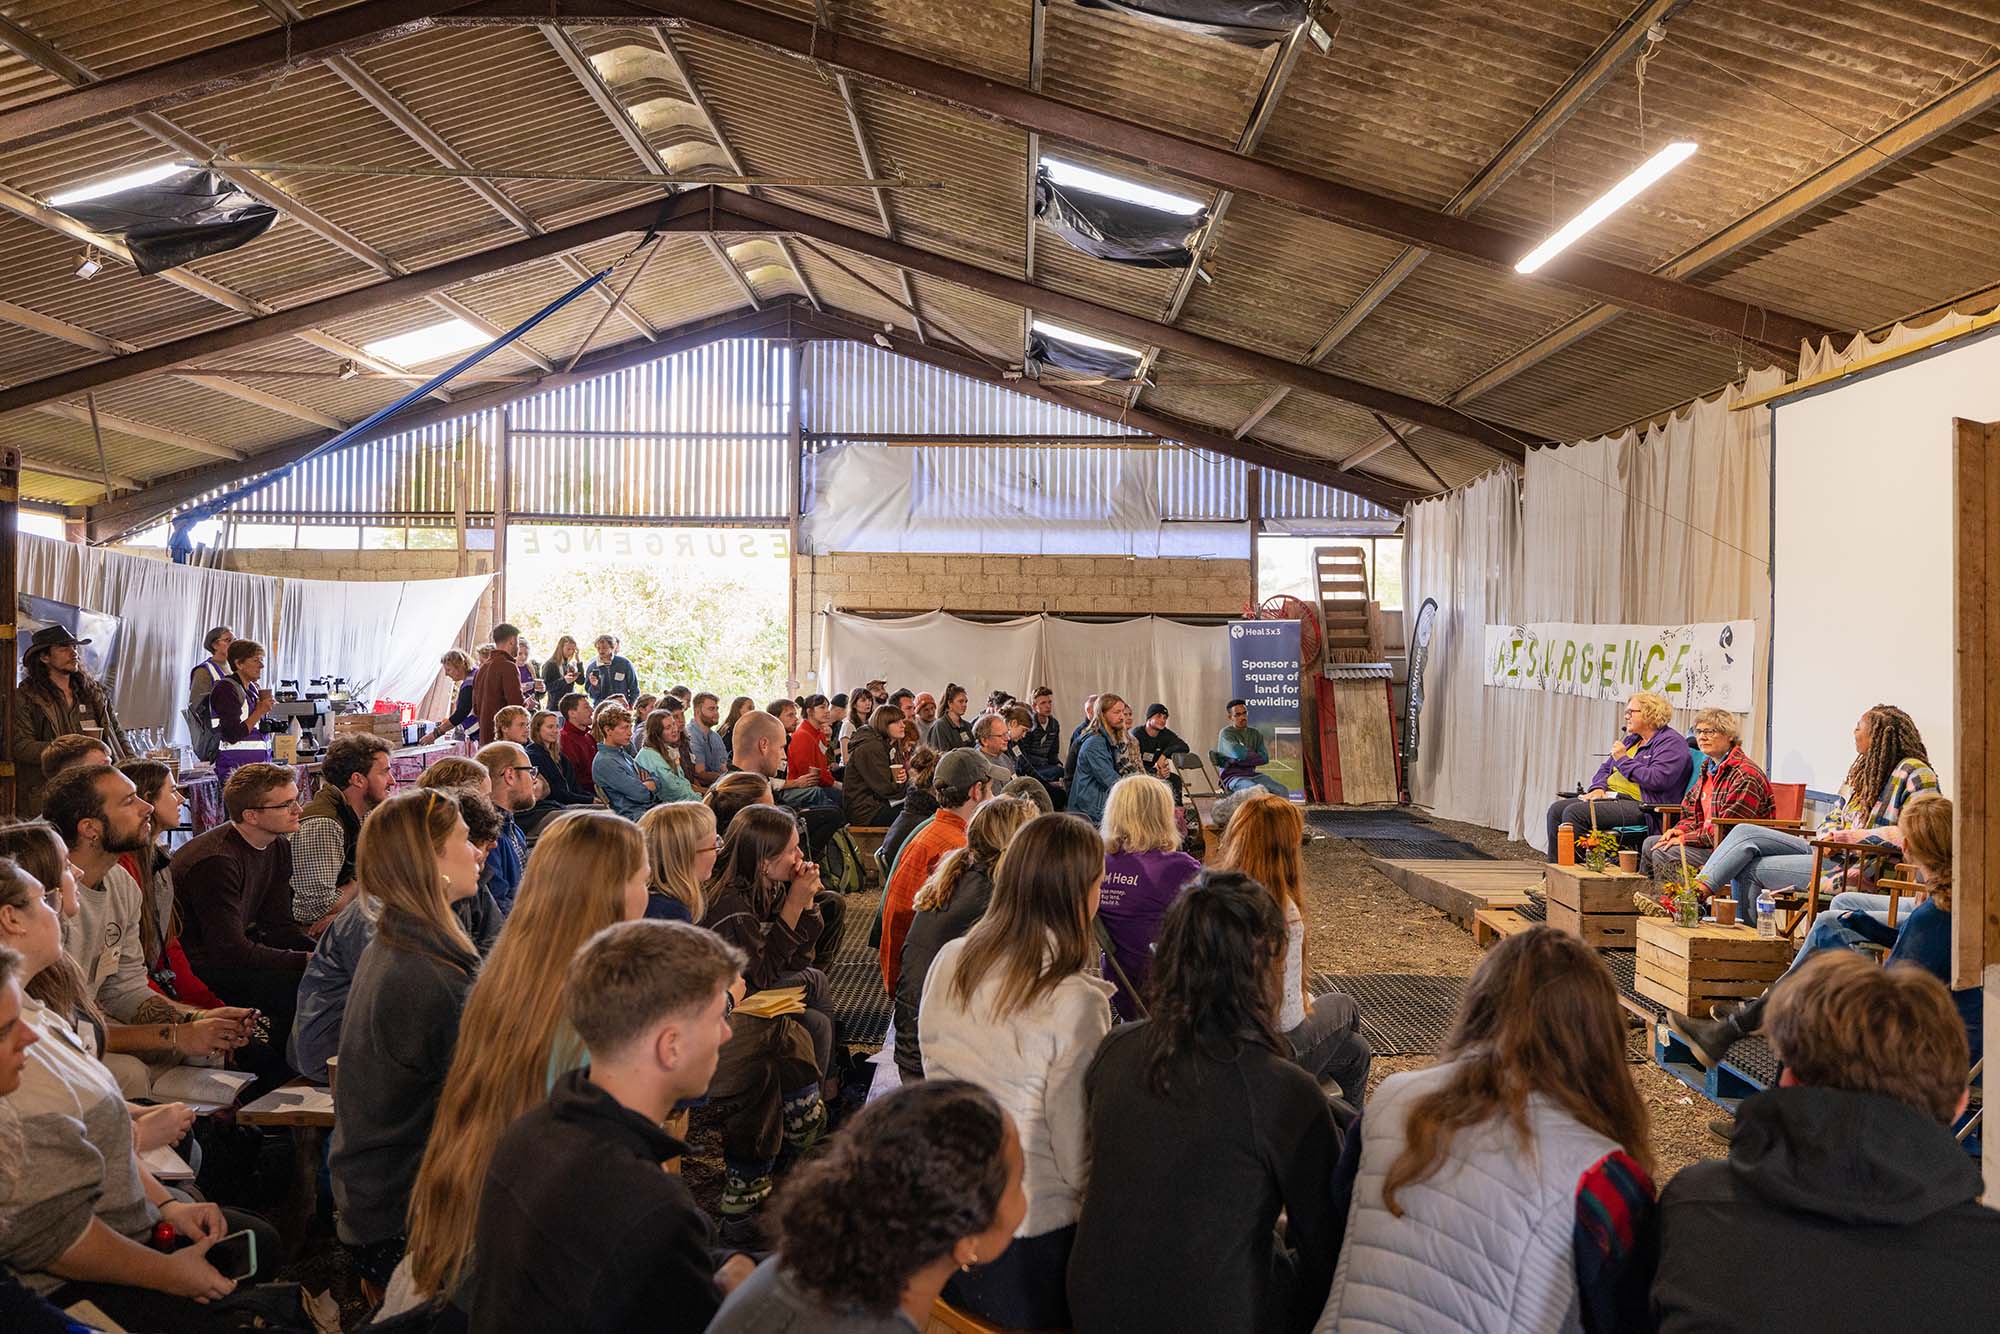 A conference inside a barn with many people watching a panel of speakers